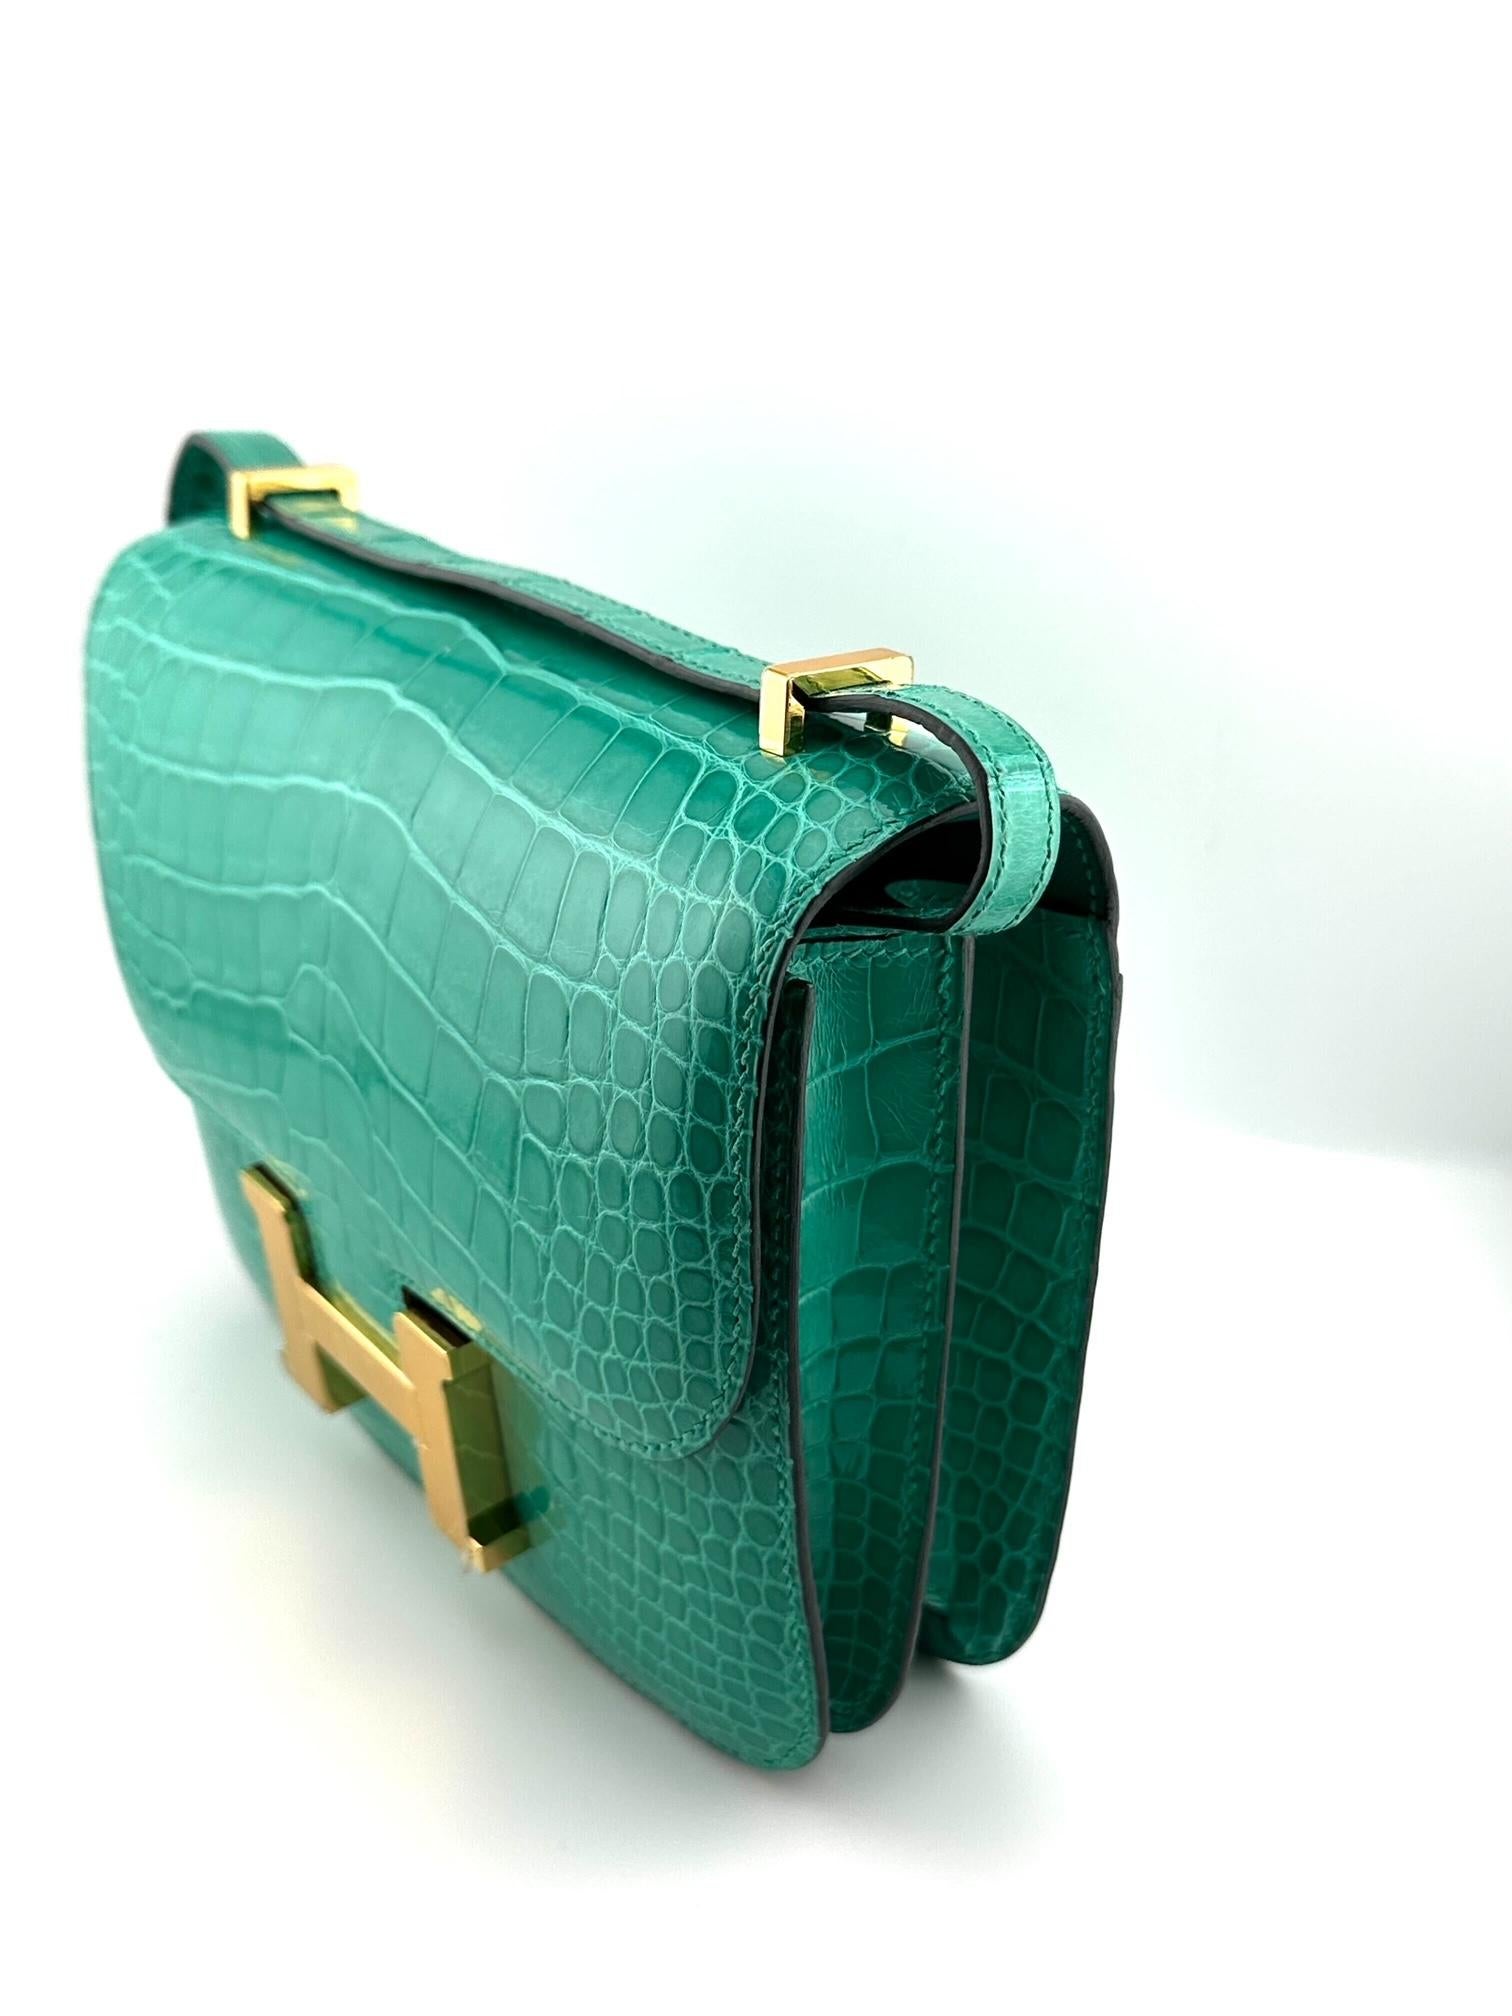 Hermès Constance III Mini 18 06 Vert Jade Smooth American Alligator Shiny In Excellent Condition In New York, NY